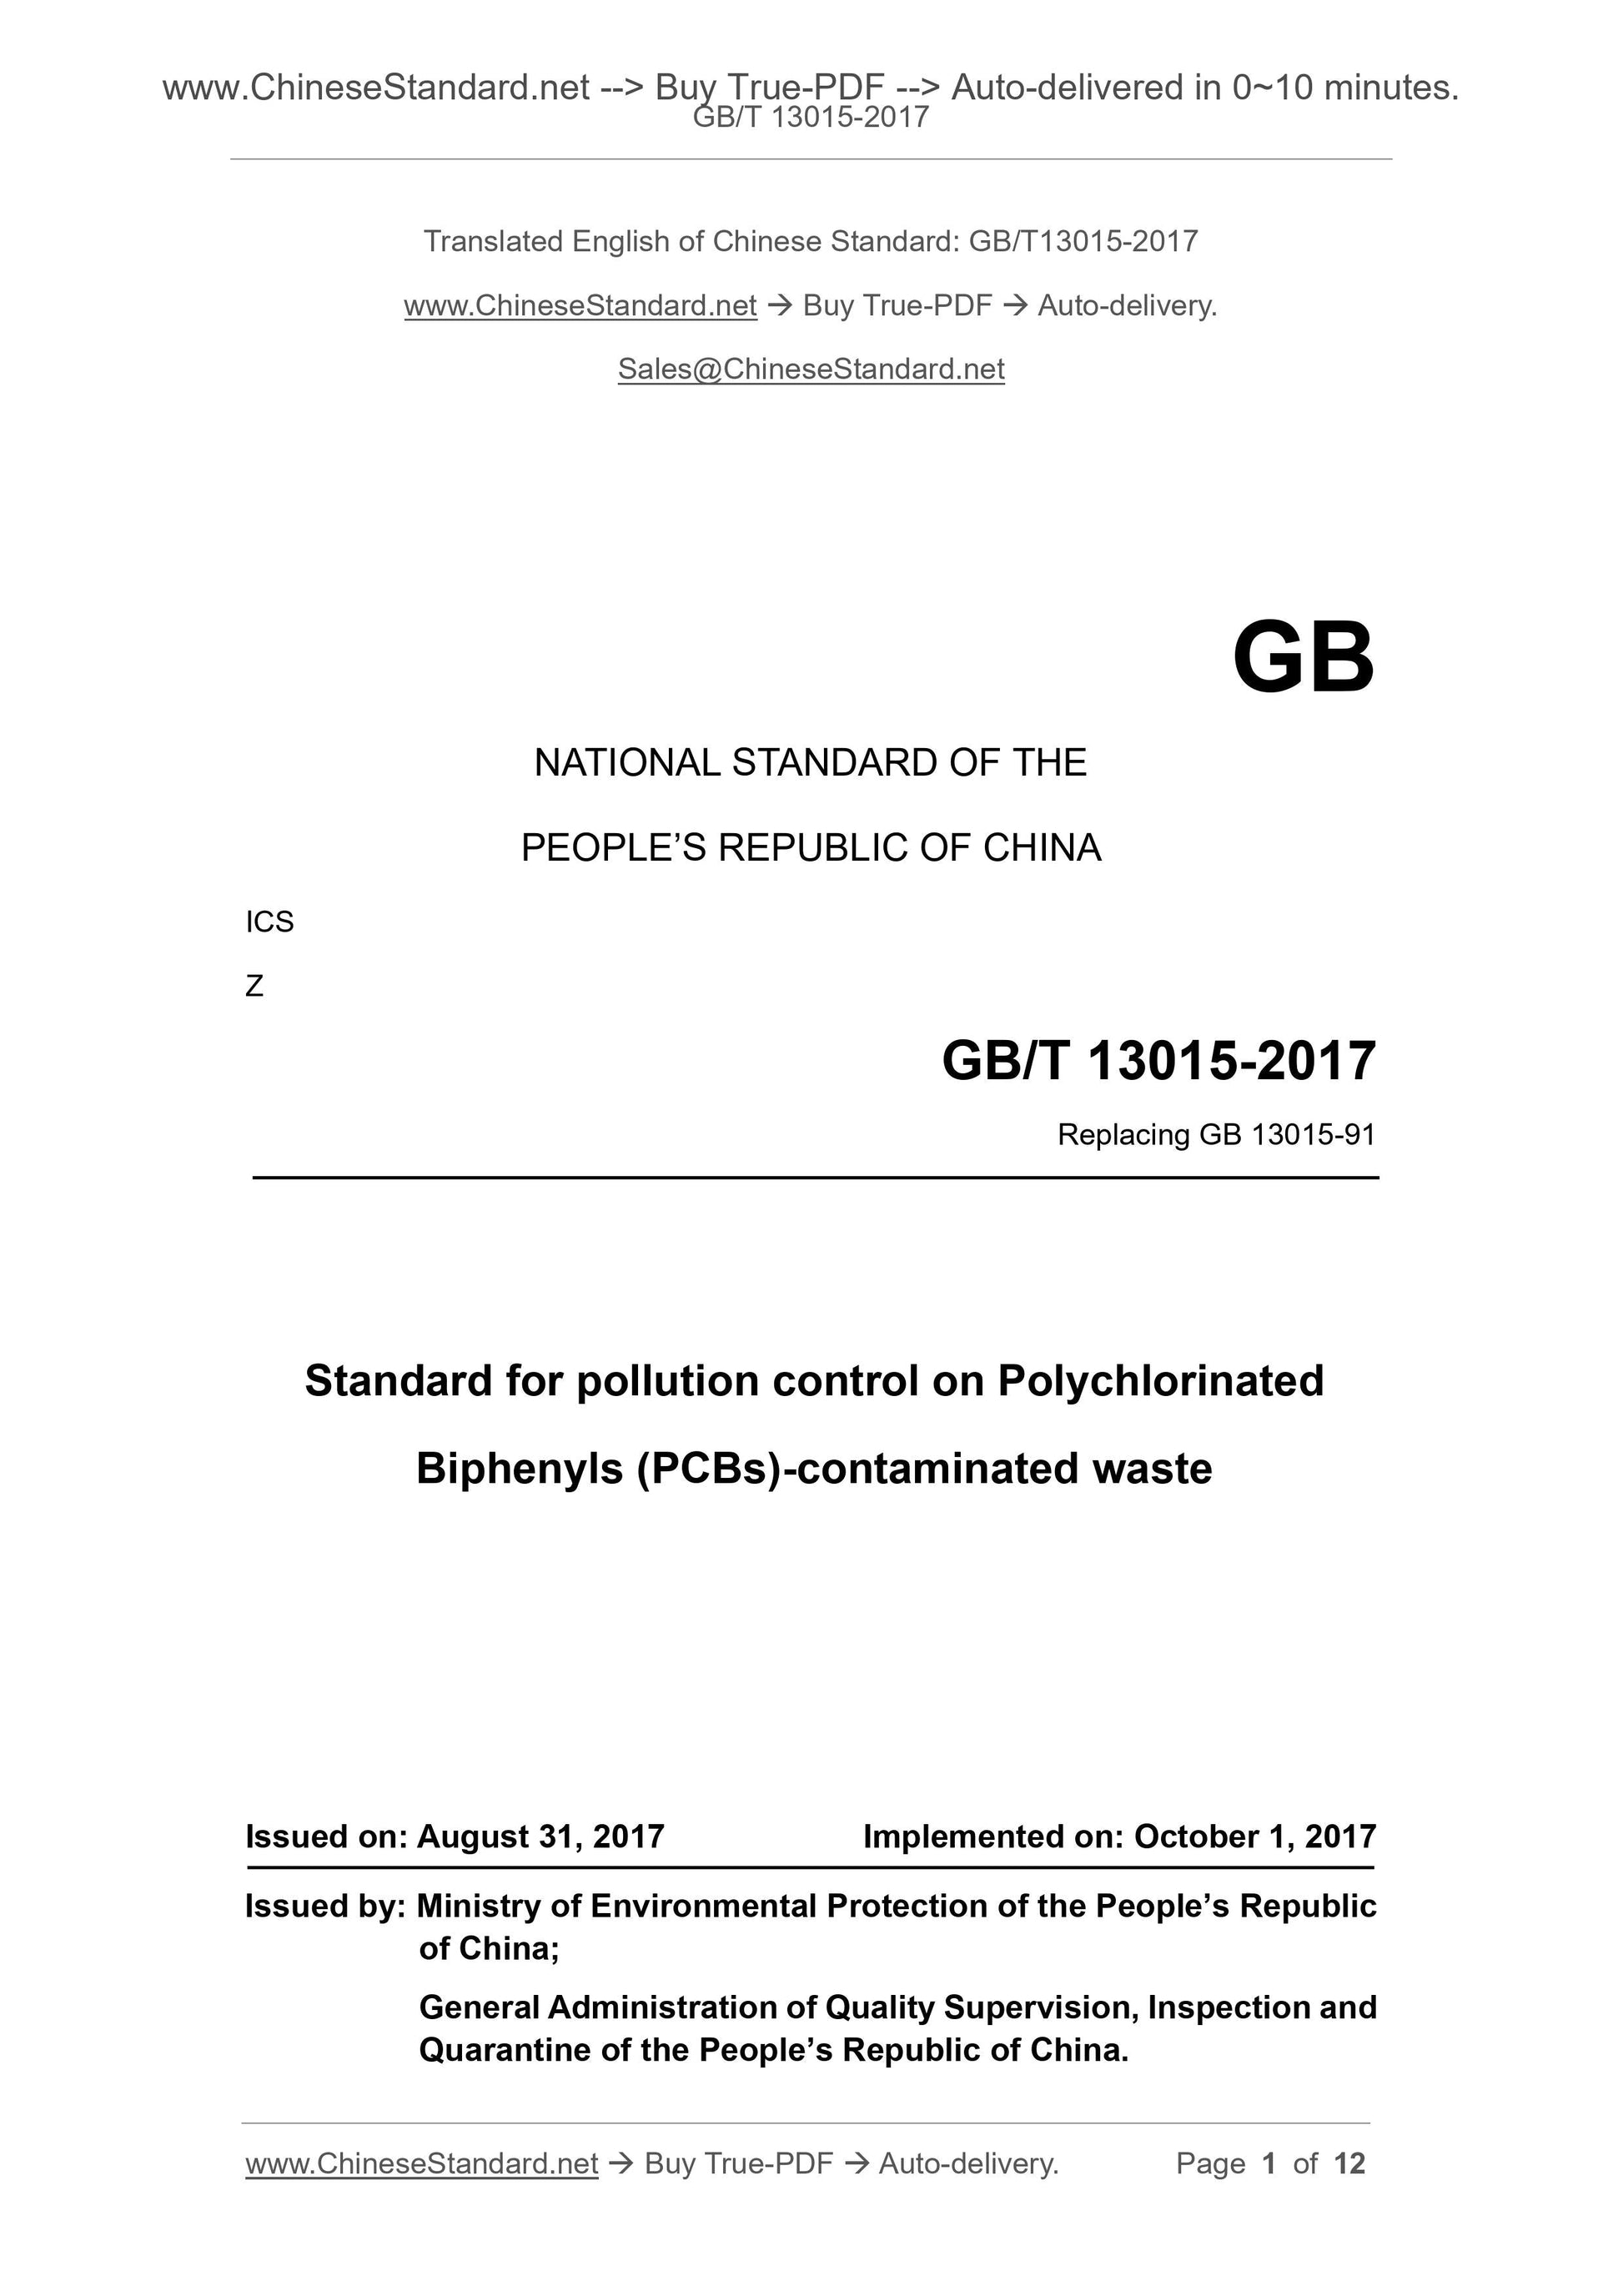 GB 13015-2017 Page 1